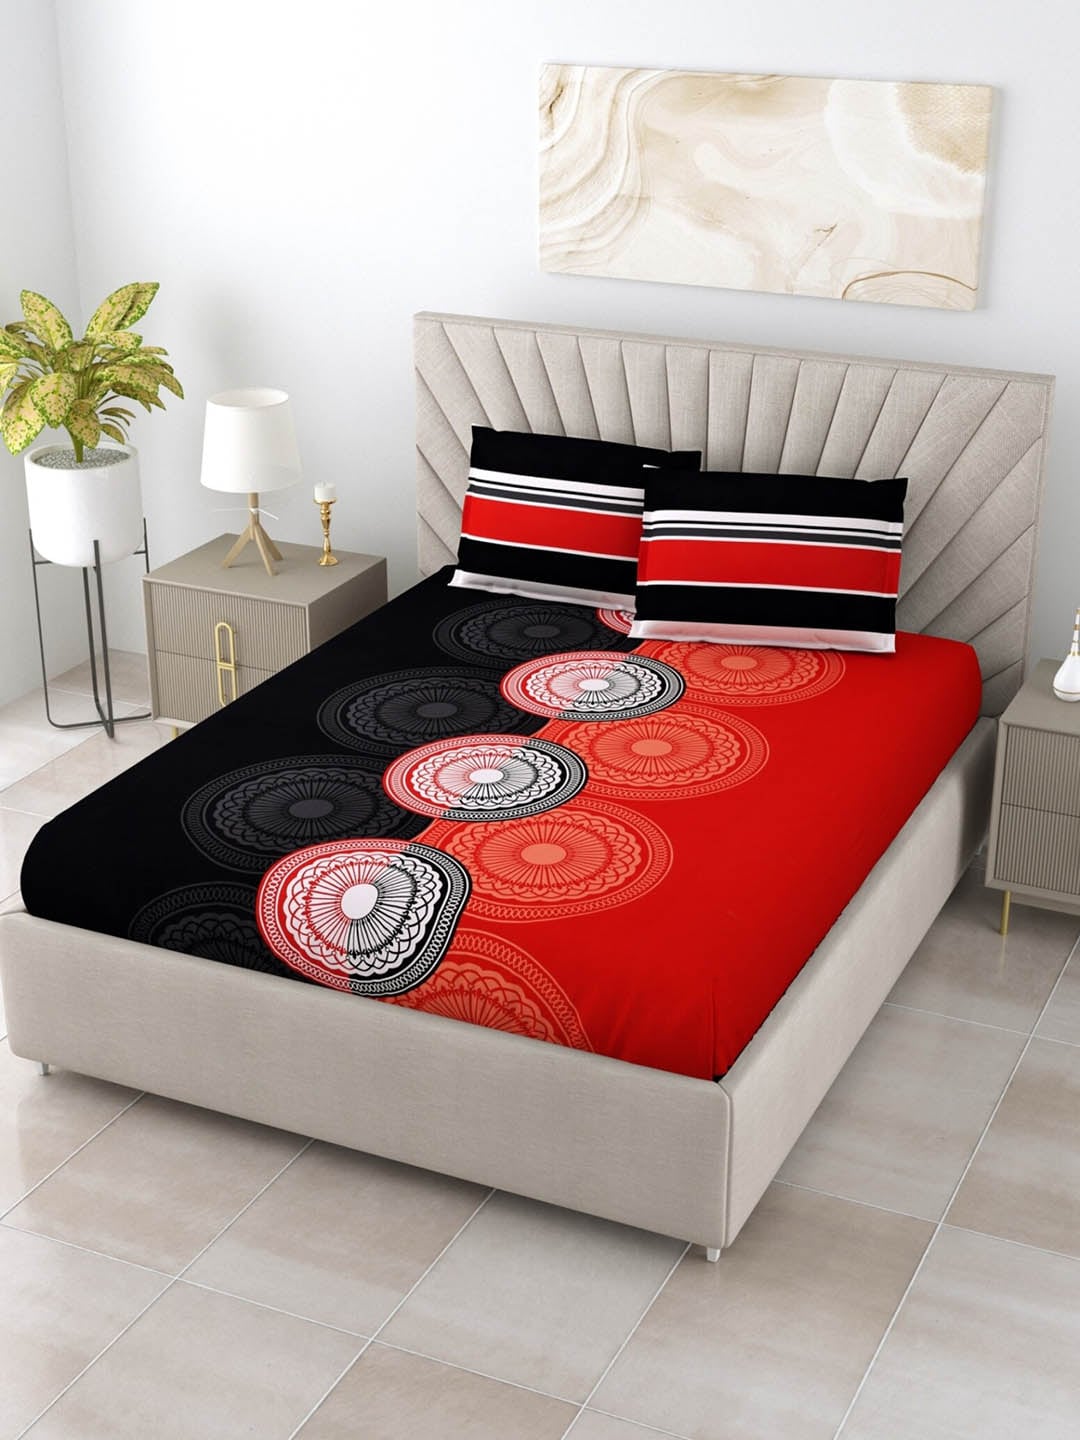 Salona Bichona Unisex Black Printed Cotton 120 TC Double Bedsheet with 2 Pillow Covers Price in India